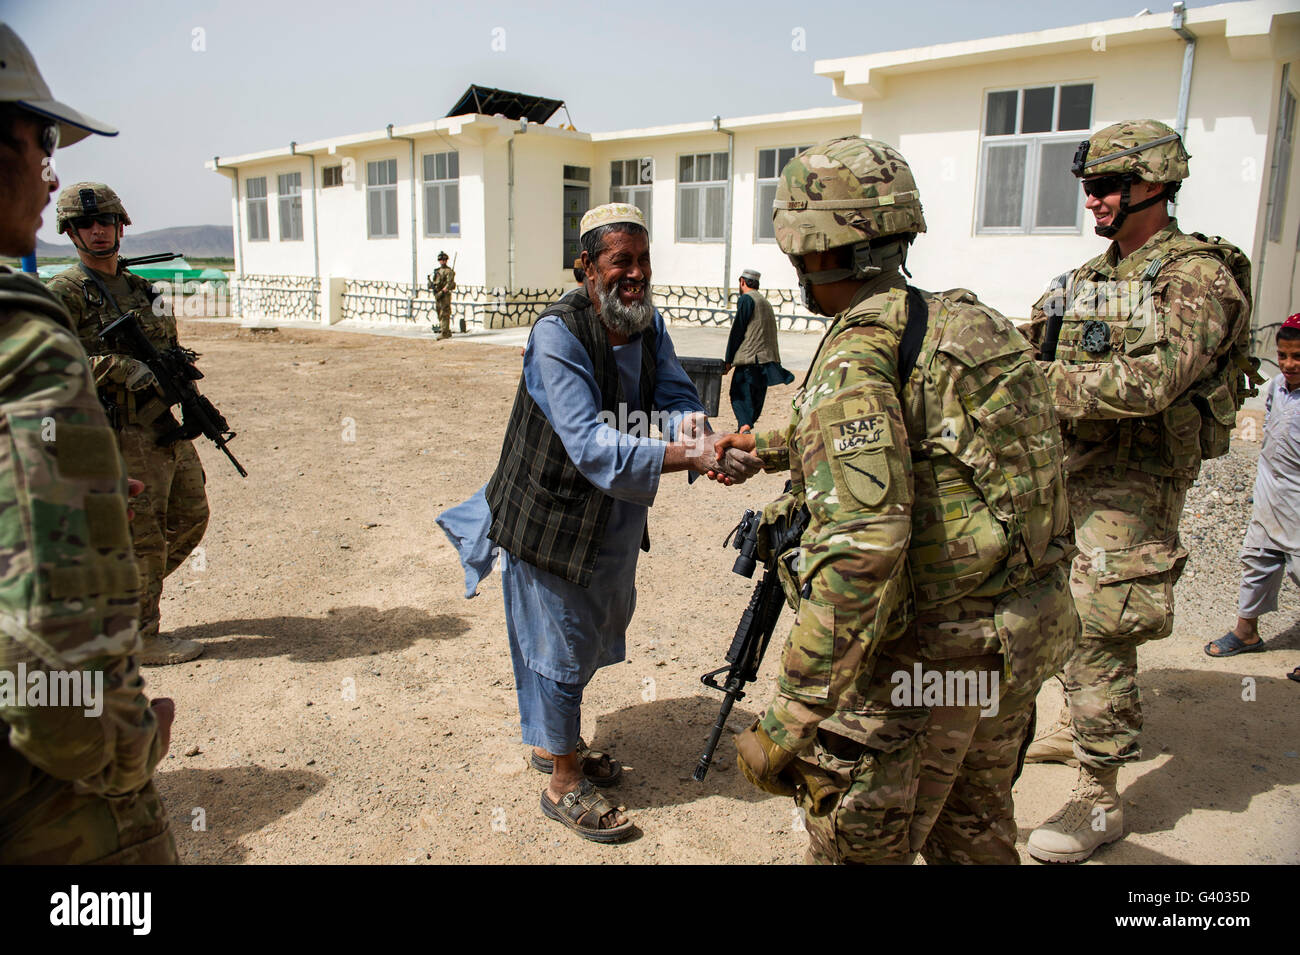 Members of the Kentucky National Guard meet with local Afghans. Stock Photo